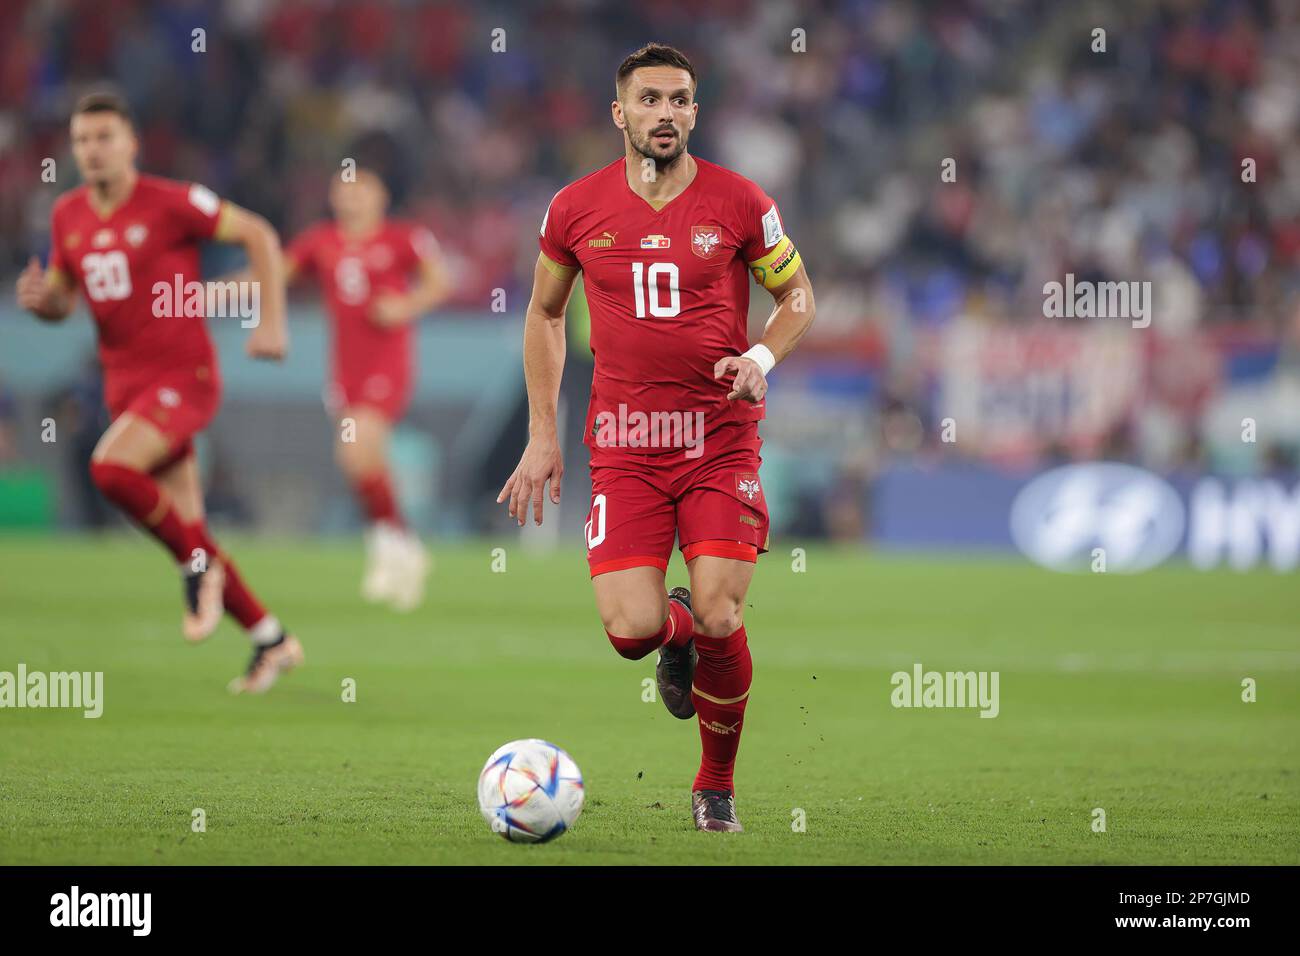 Dusan Tadic of Serbia in action during the FIFA World Cup Qatar 2022 match between Serbia and Switzerland at Stadium 974. Final score; Serbia 2:3 Switzerland. Stock Photo